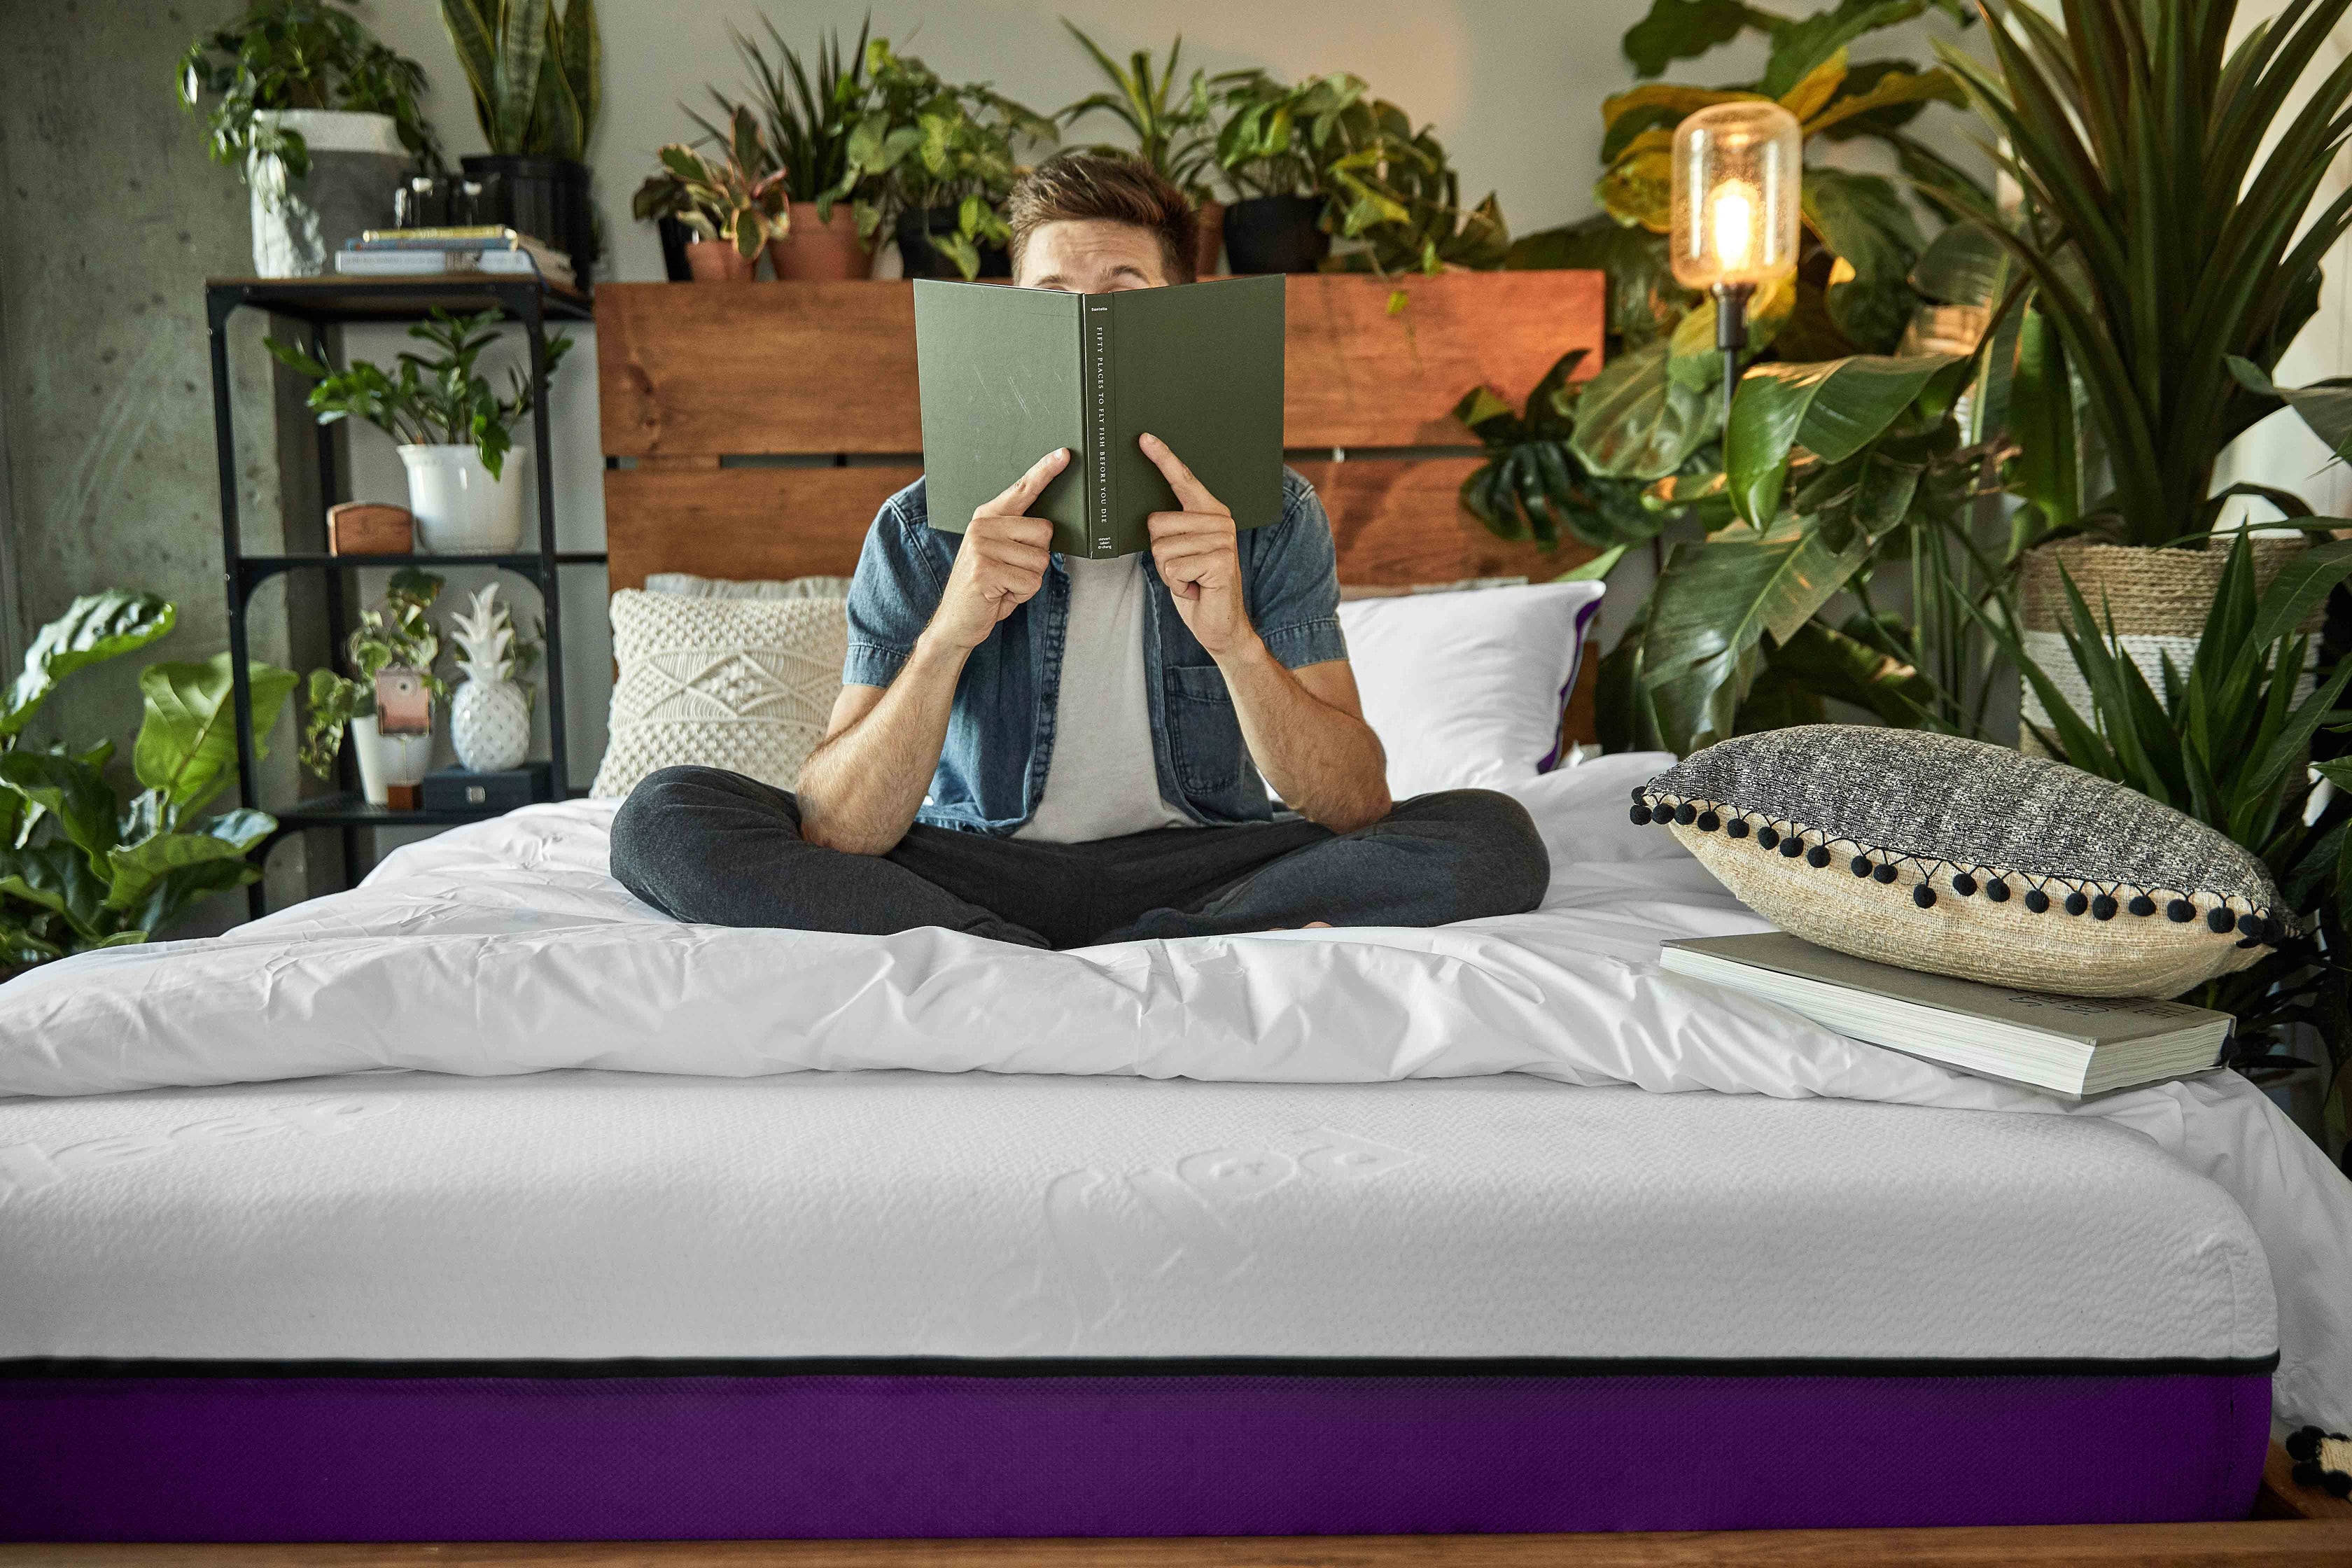 Young man reading a book while sitting on its Polysleep mattress